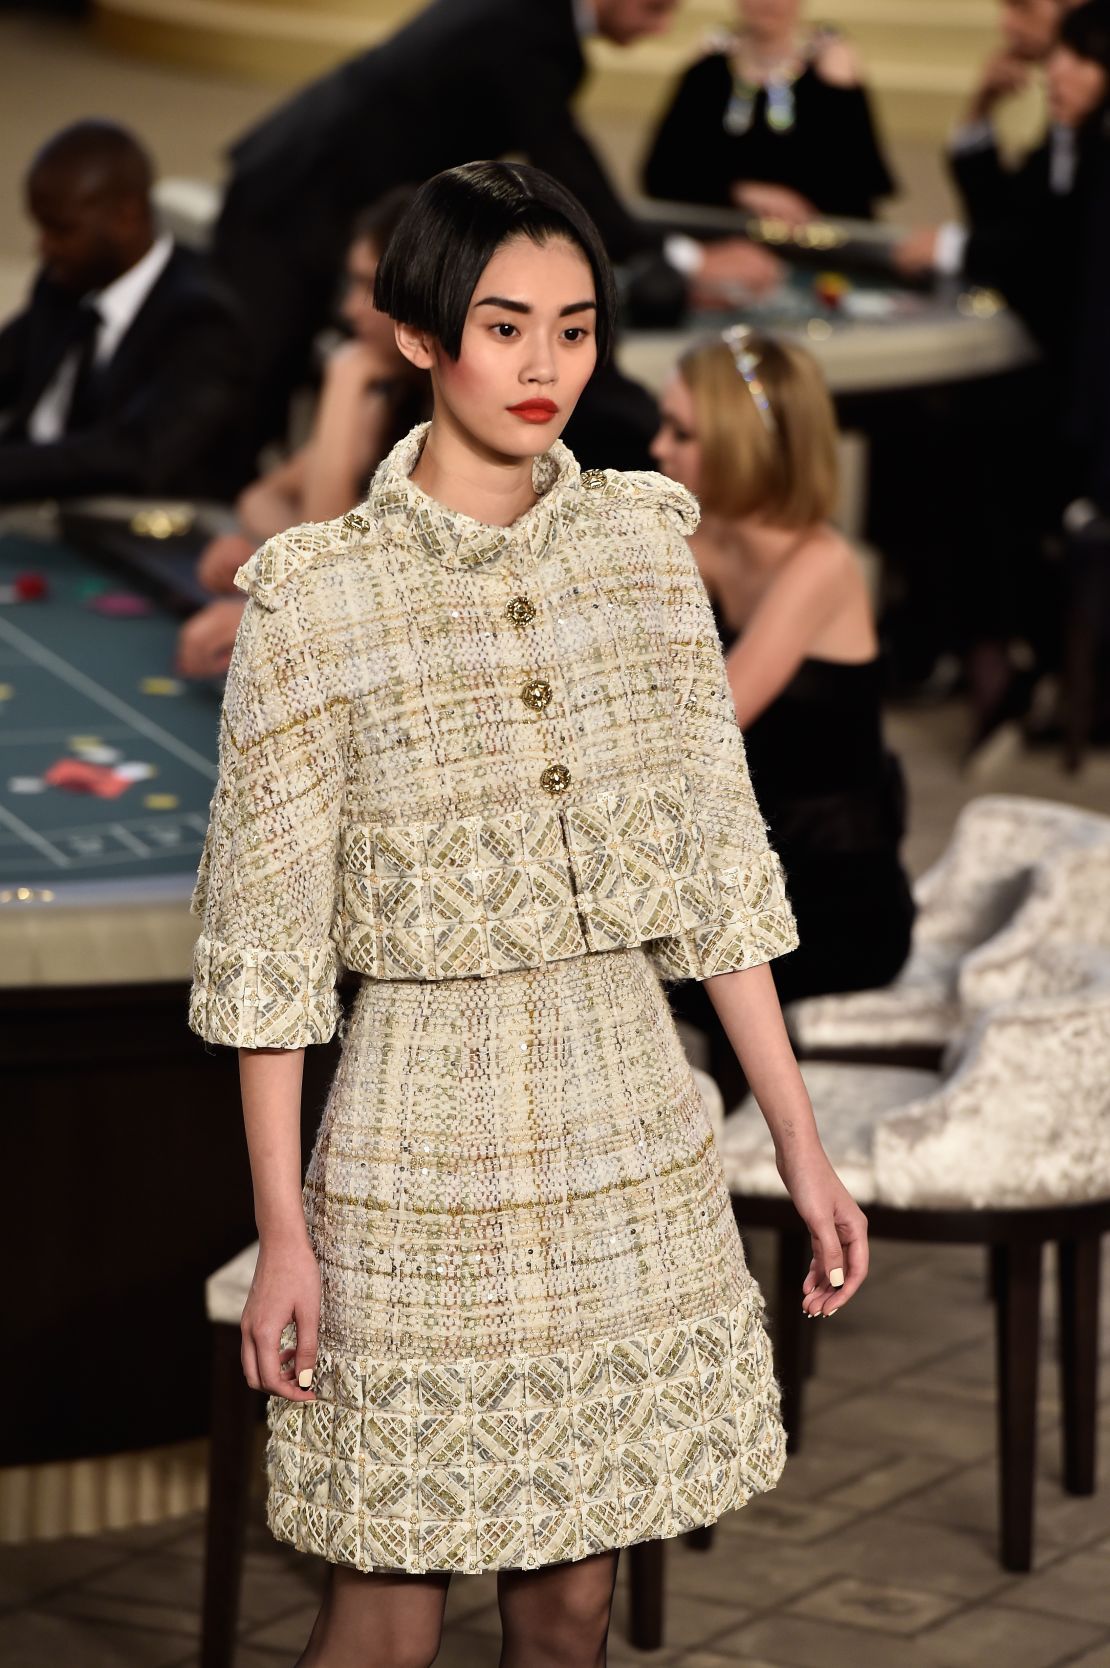 Chanel included a 3D-printed suit as part of its Autumn-Winter 2015 Haute Couture collection.